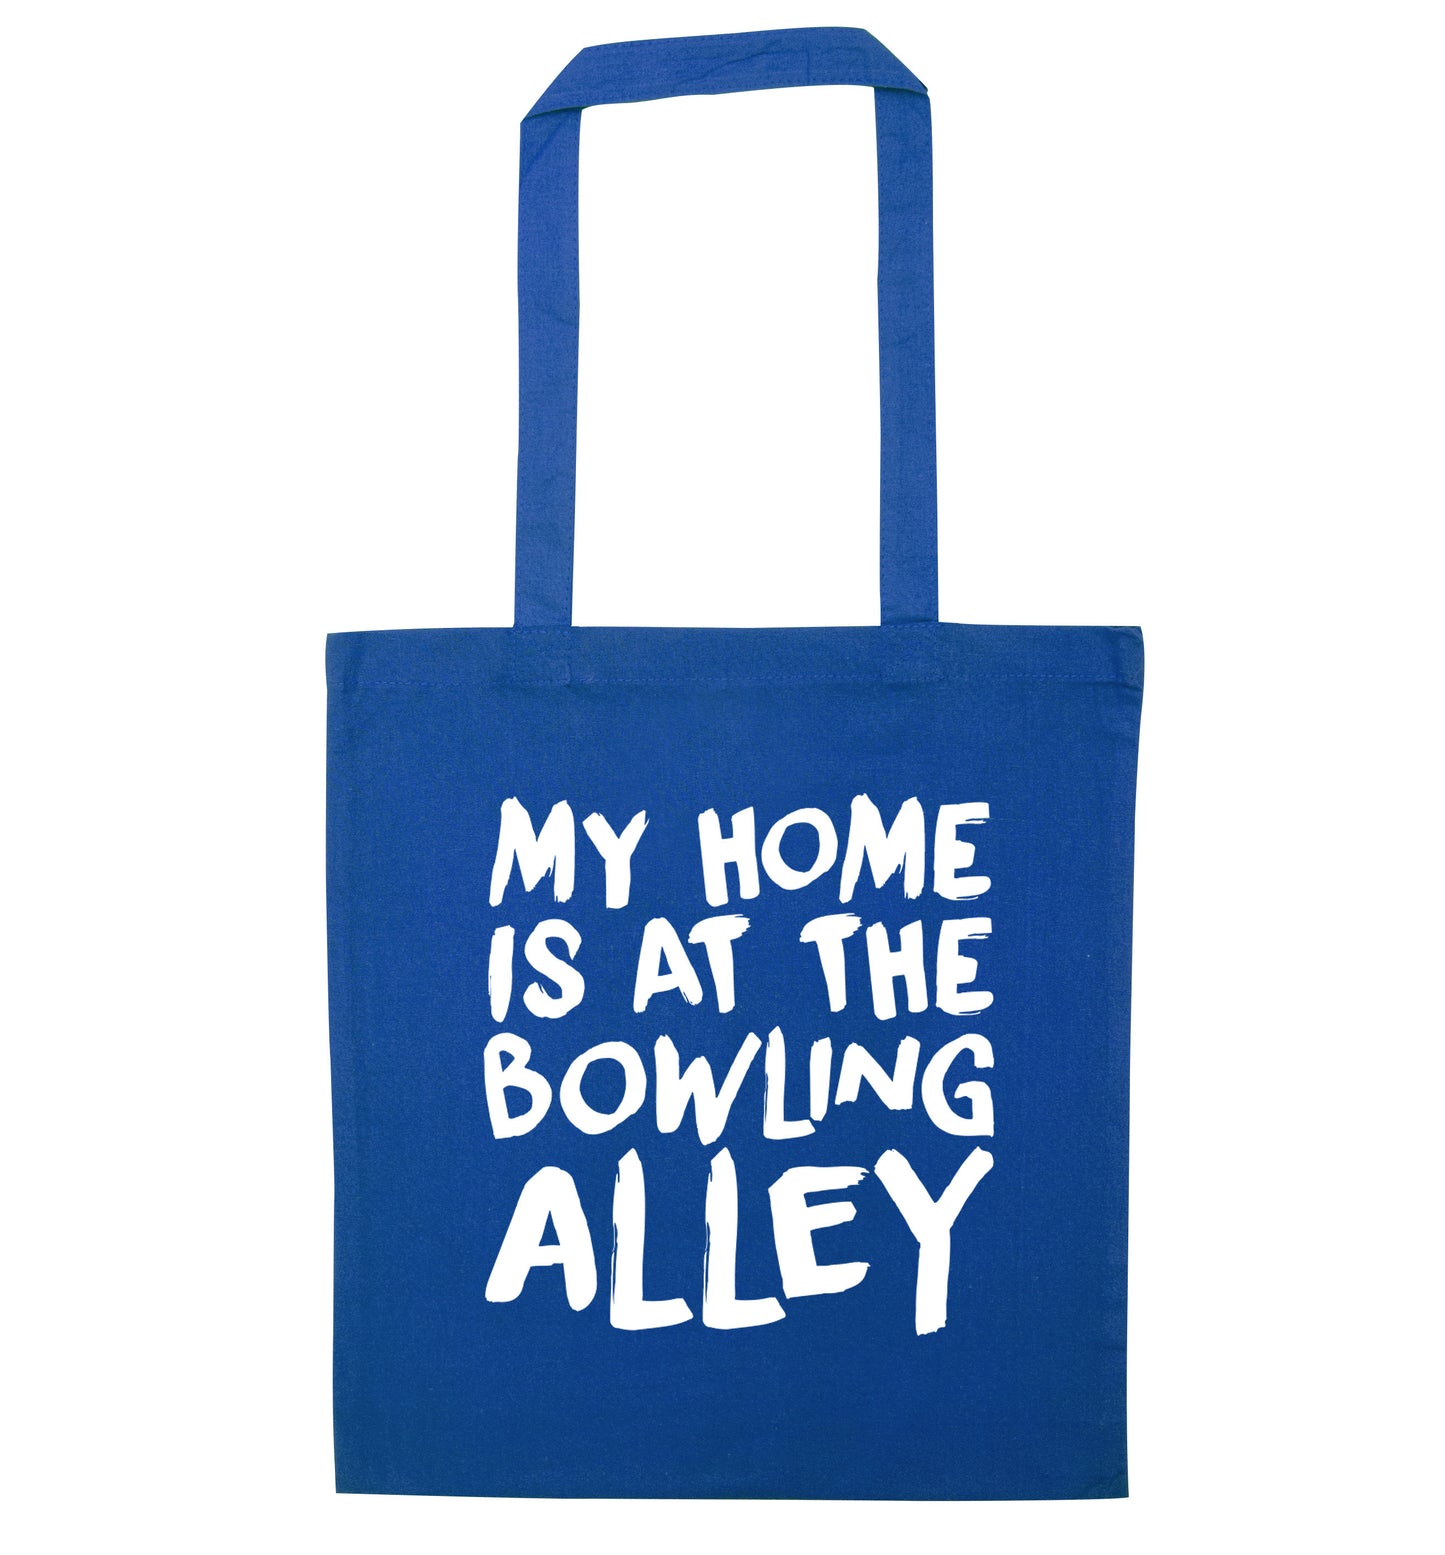 My home is at the bowling alley blue tote bag